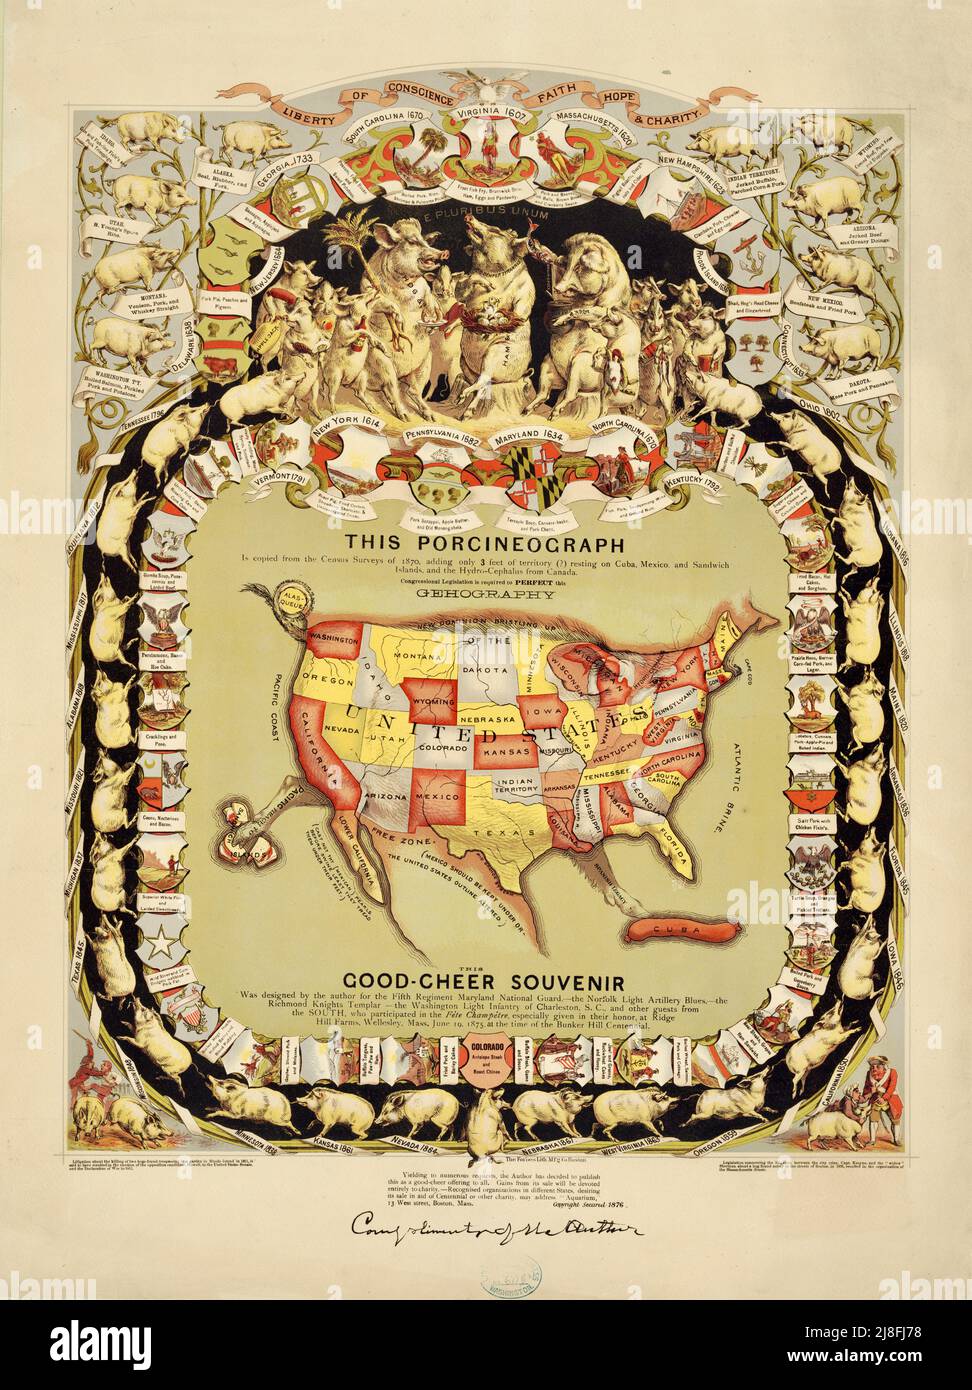 This Porcineograph - A map of the United States in the shape of a pig, surrounded by pigs representing the different states - 1876 Stock Photo